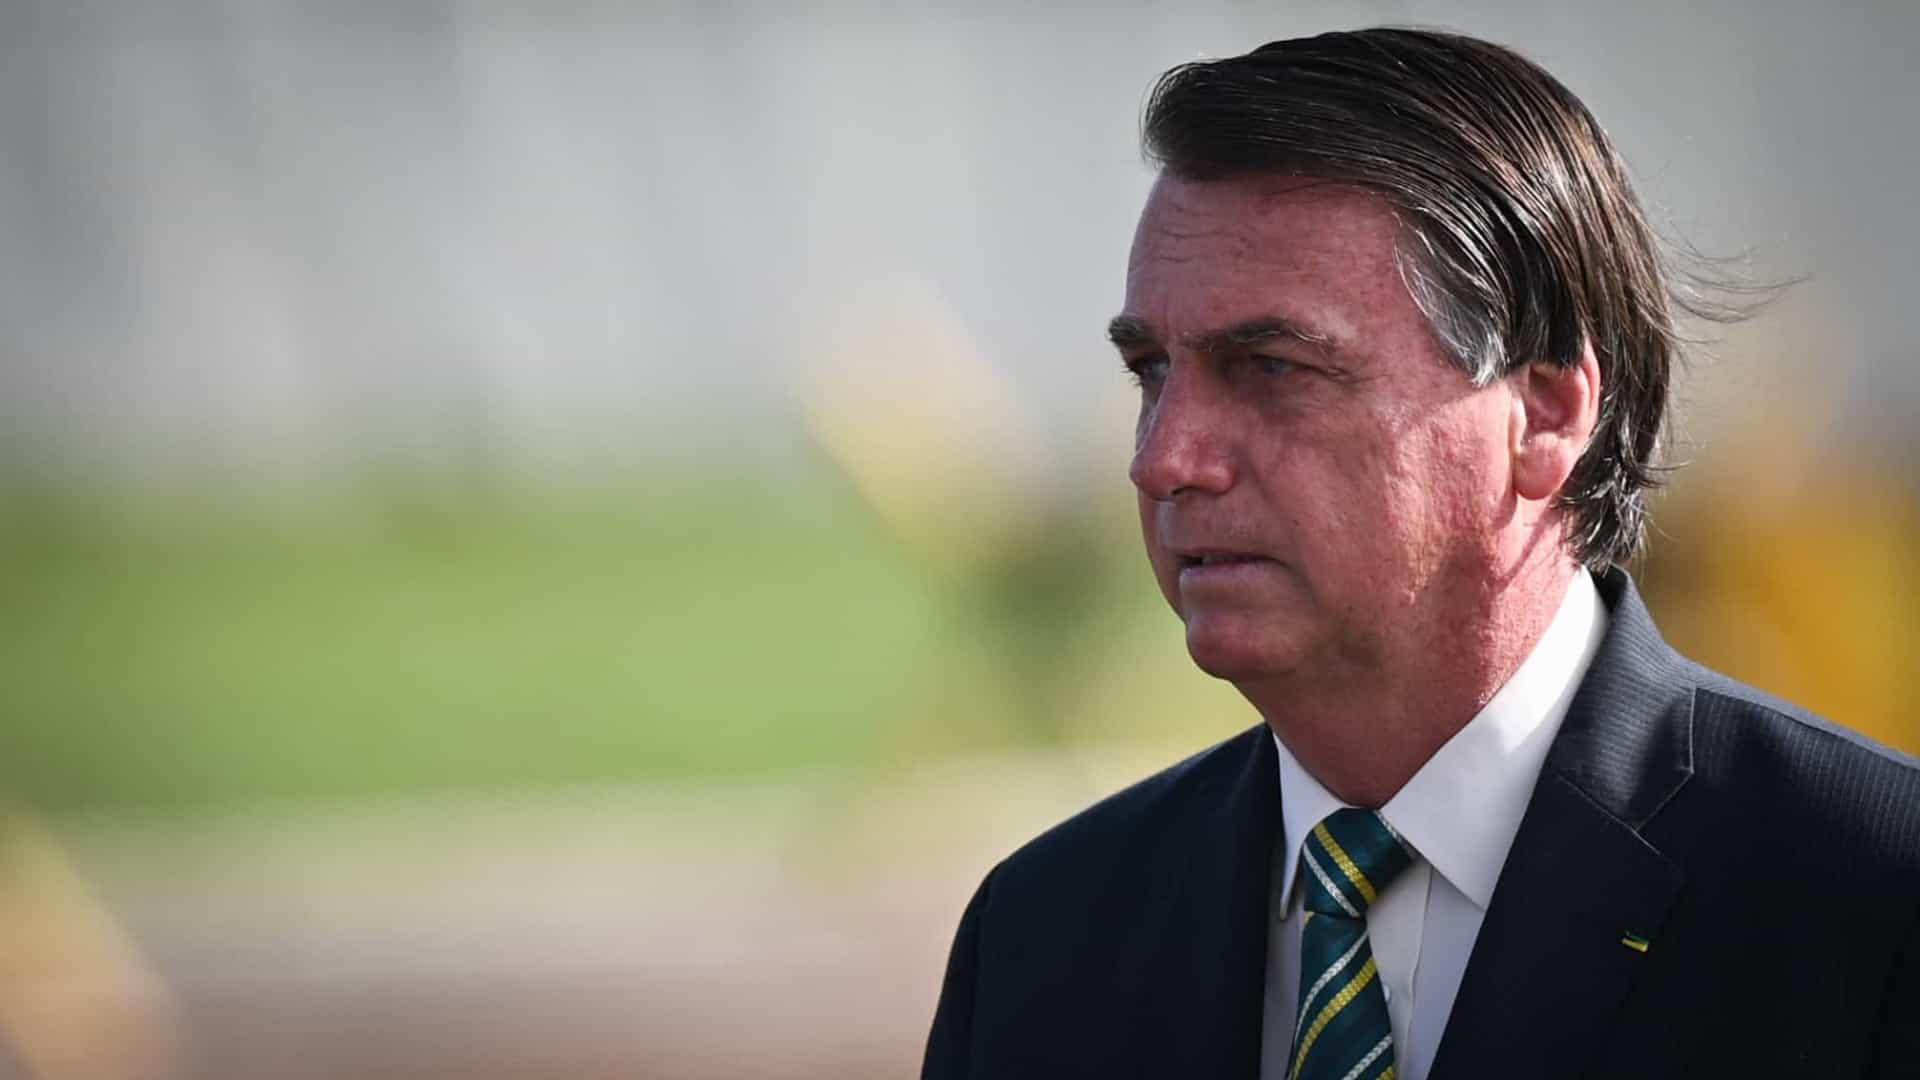 Brazil's Bolsonaro approval rating falls to 32.9% from 41.2% in October